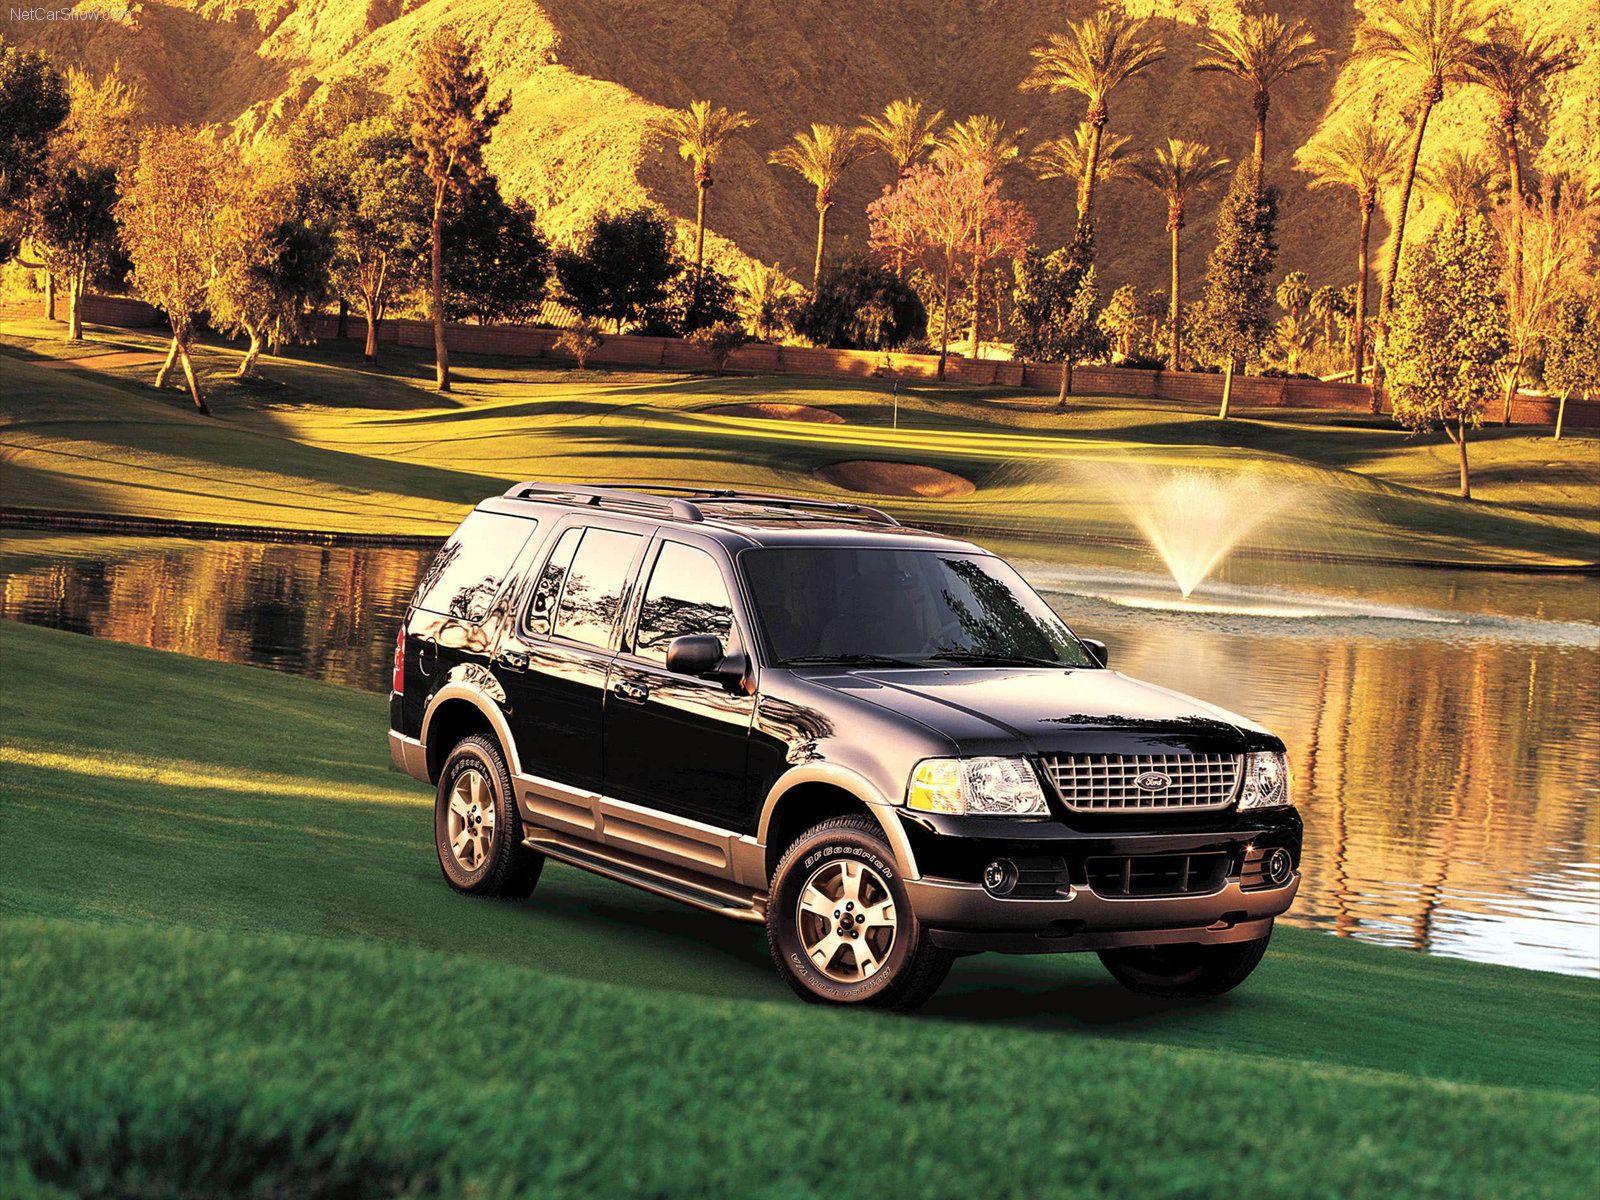 All new Ford Explorer 2011 lead ford explorer videos car photo, All